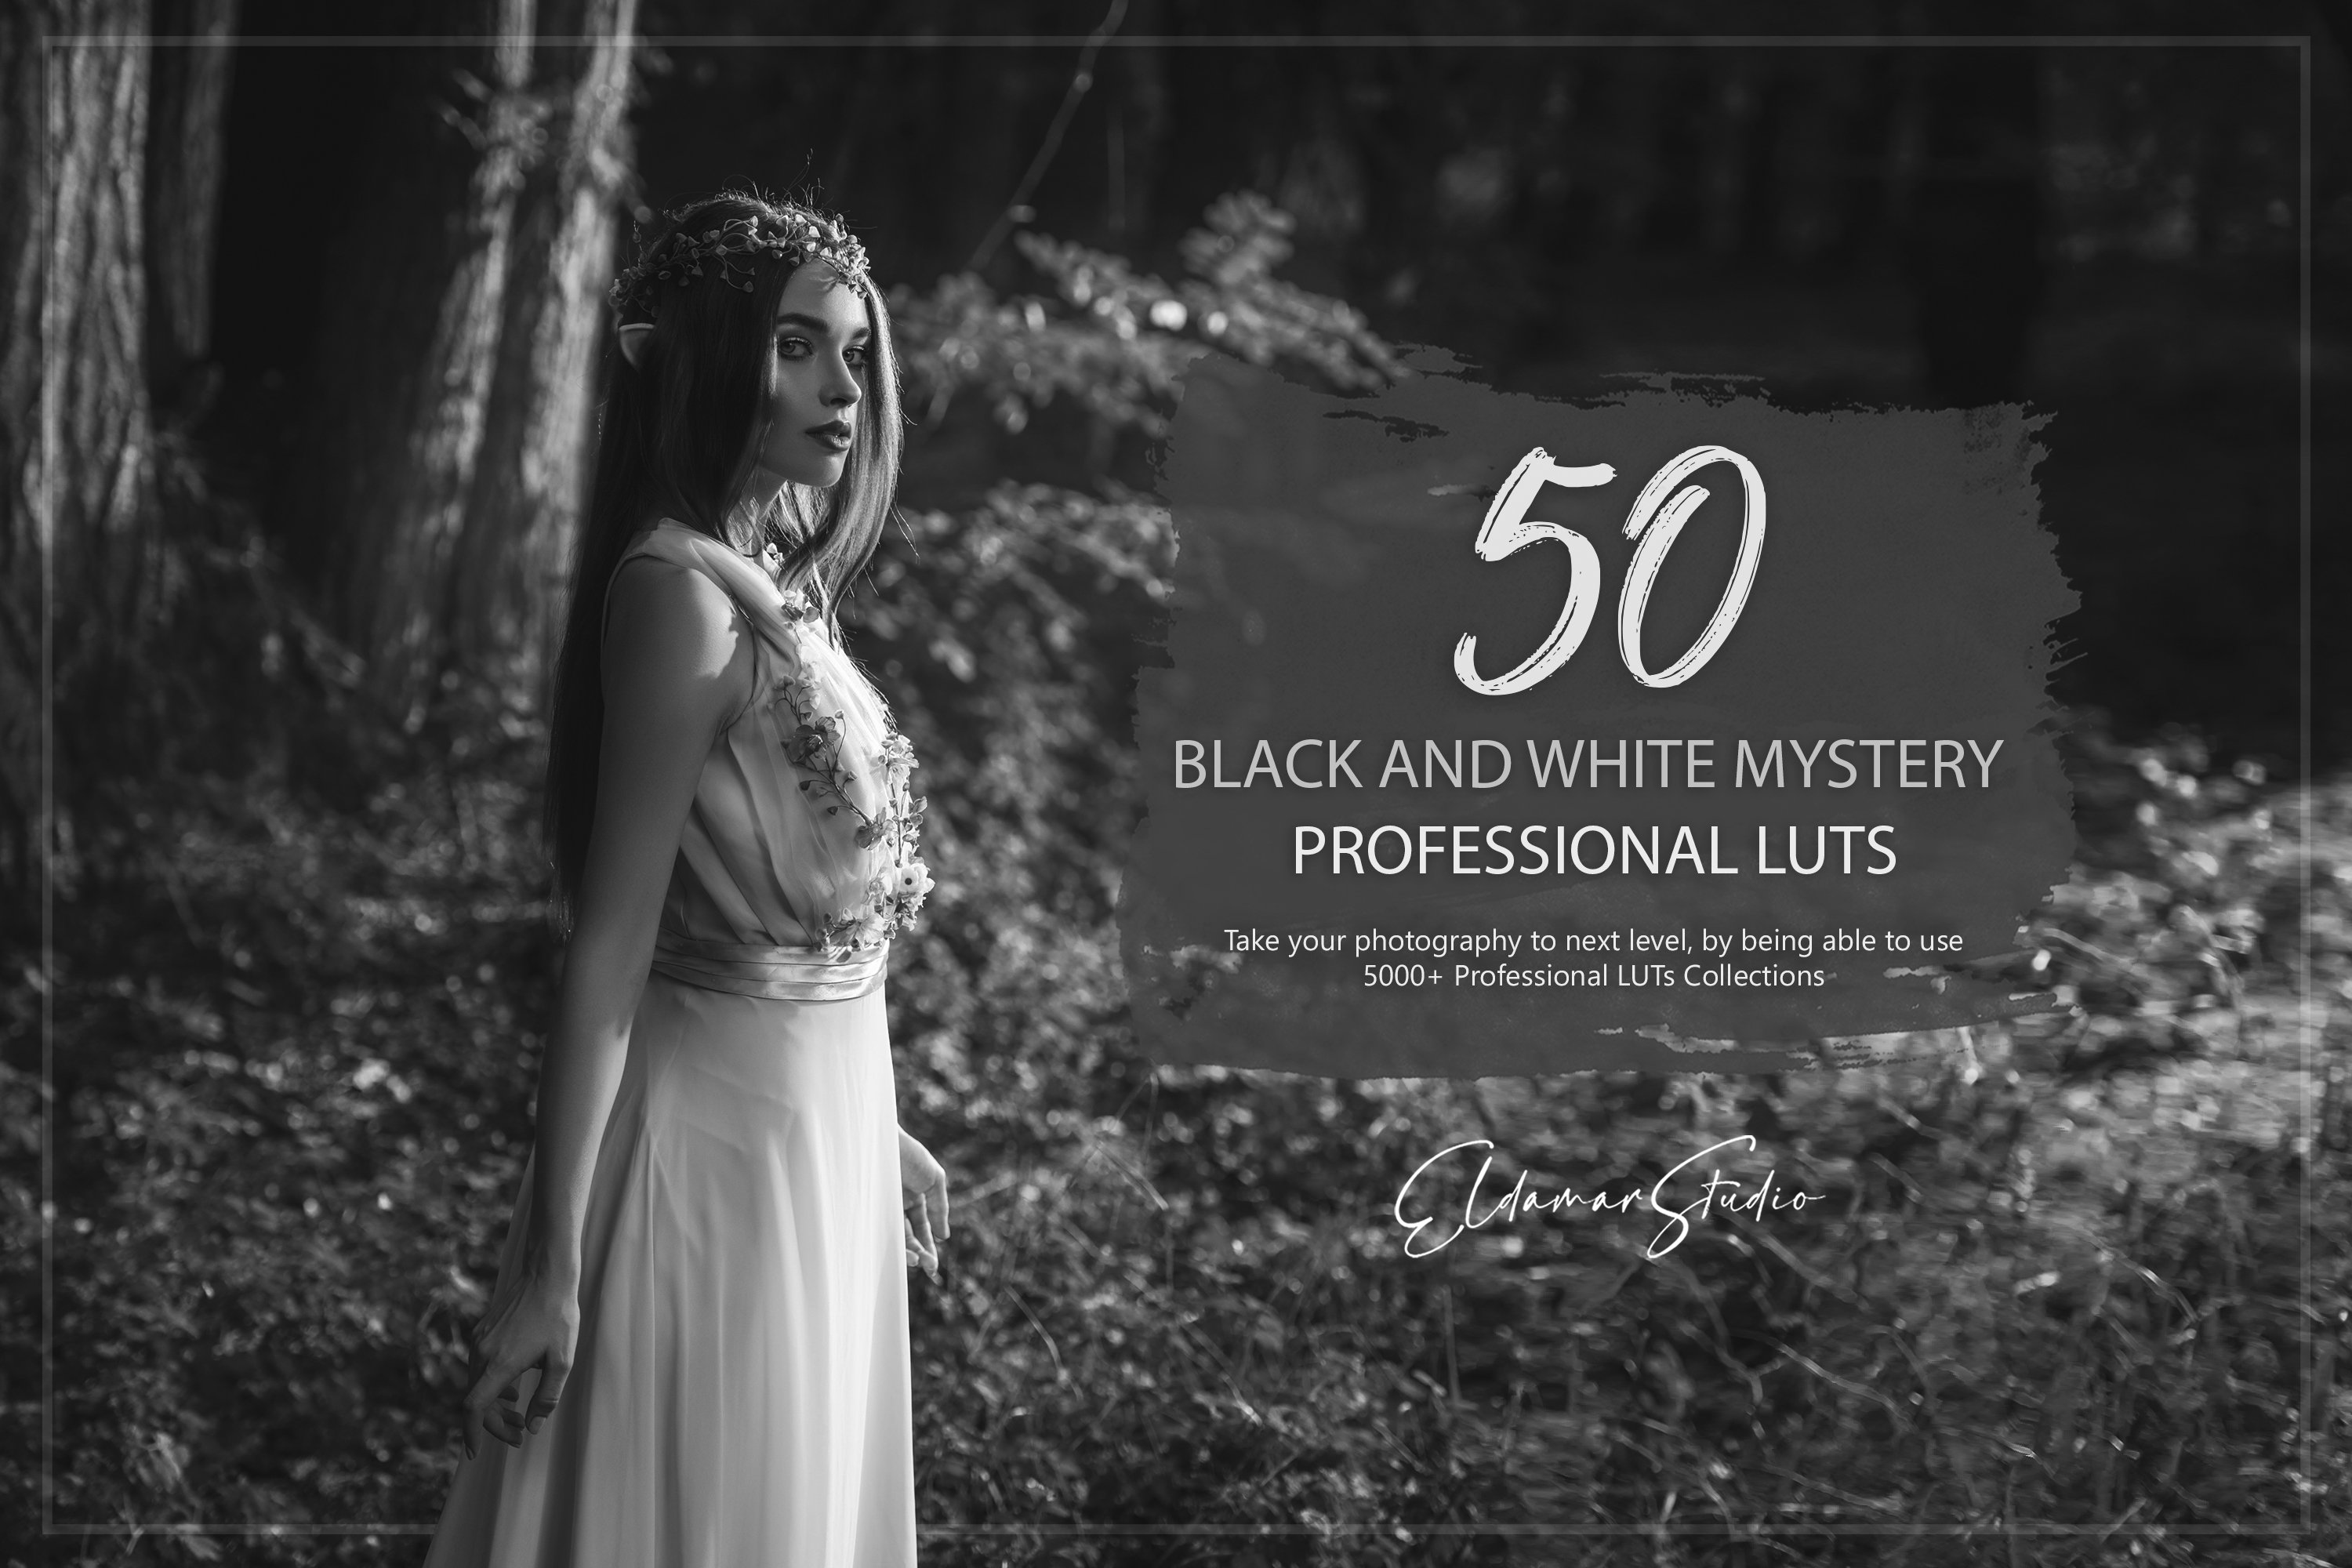 50 Black and White Mystery LUTs Packcover image.